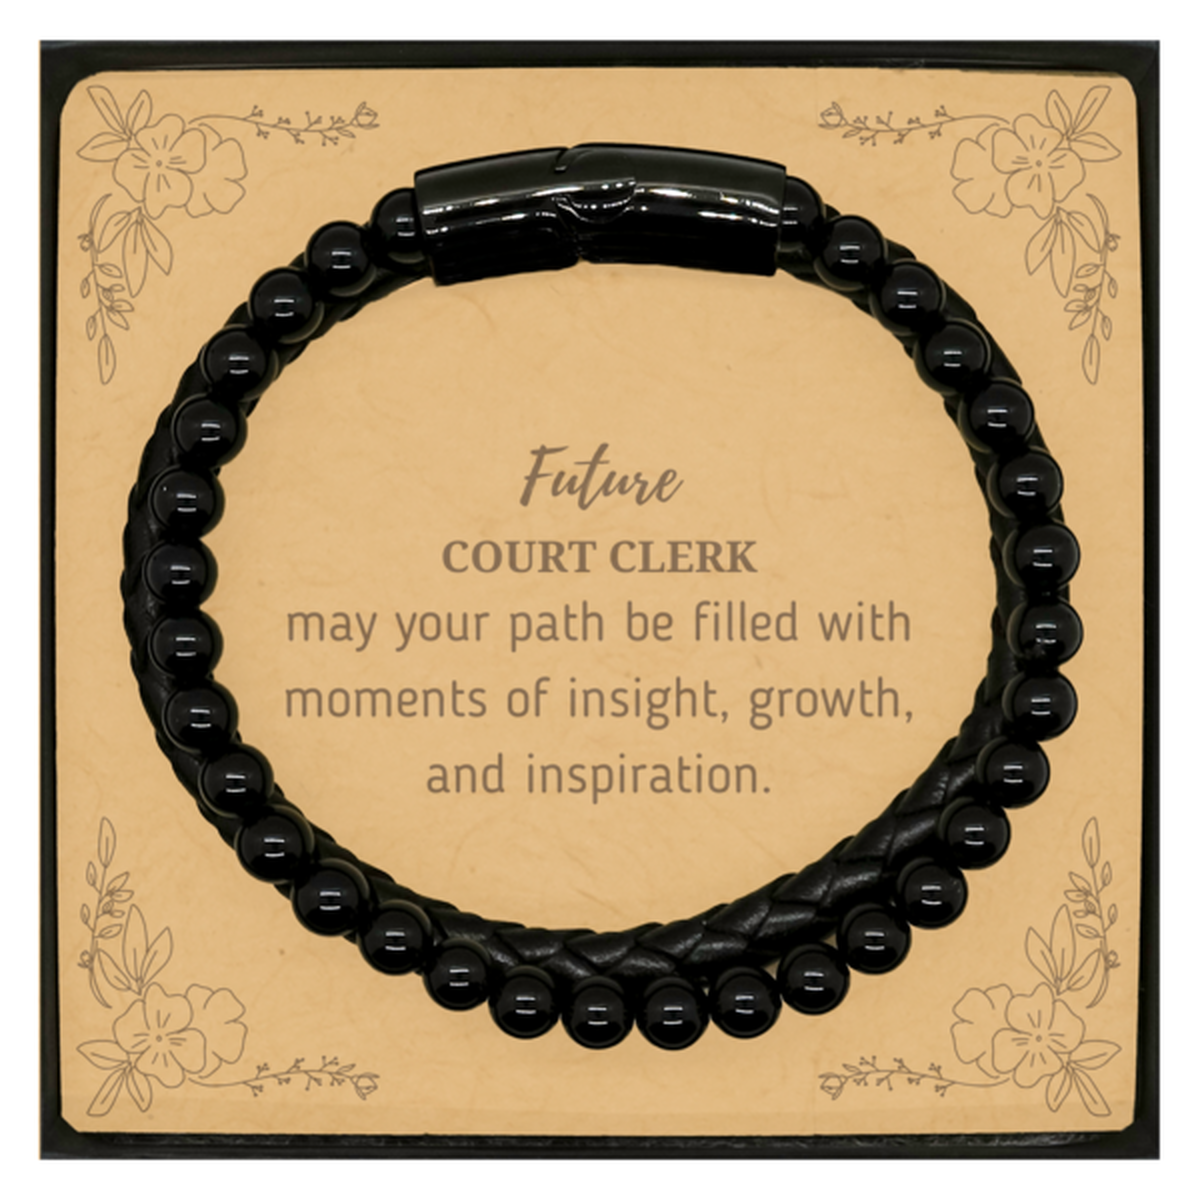 Future Court Clerk Gifts, May your path be filled with moments of insight, Graduation Gifts for New Court Clerk, Christmas Unique Stone Leather Bracelets For Men, Women, Friends